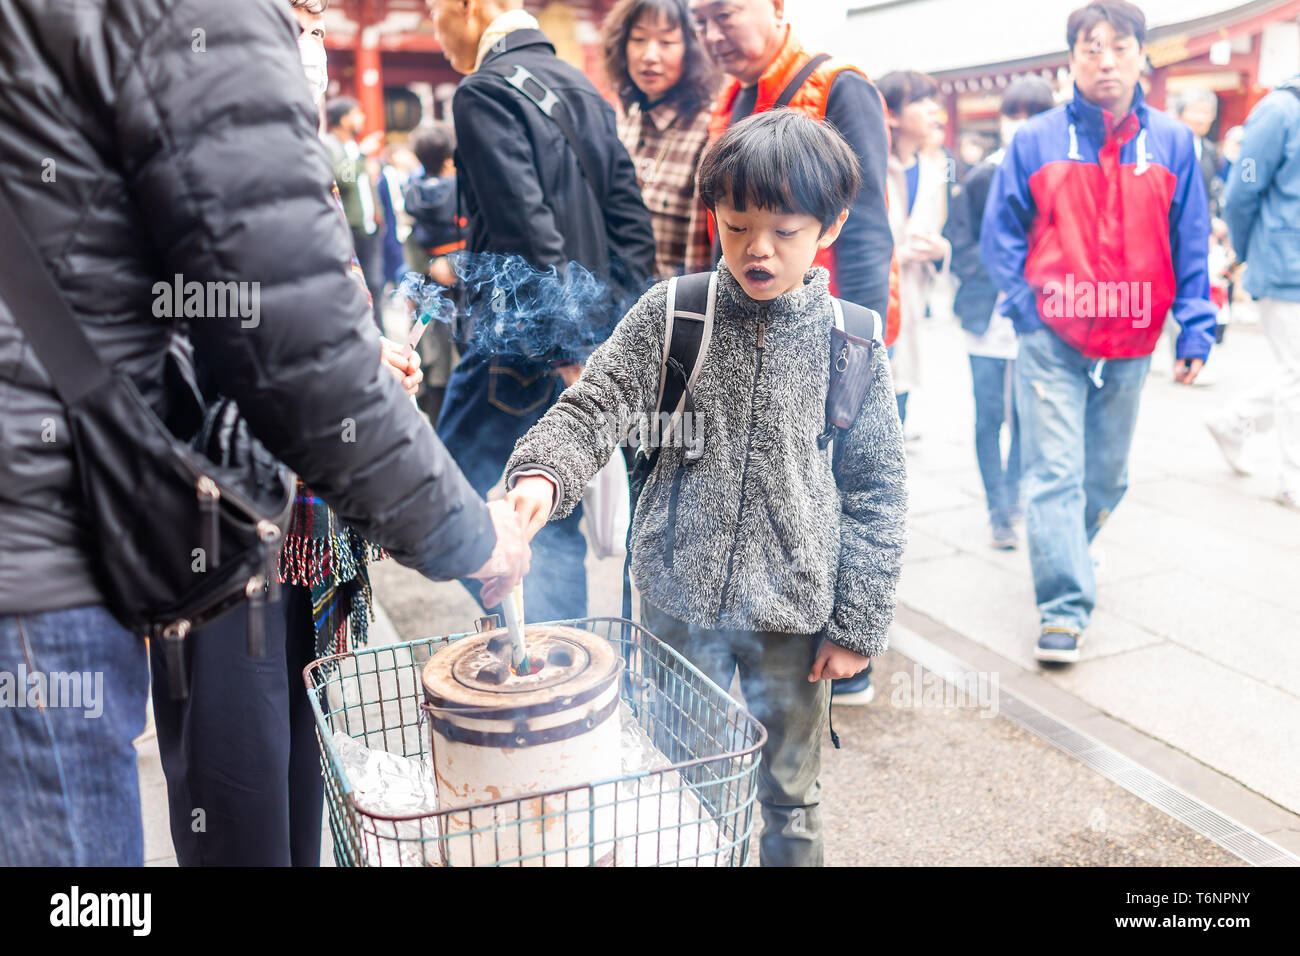 Tokyo, Japan - March 30, 2018: Asakusa district area with Sensoji temple shrine and people young boy Japanese child in awe of burning incense with smo Stock Photo